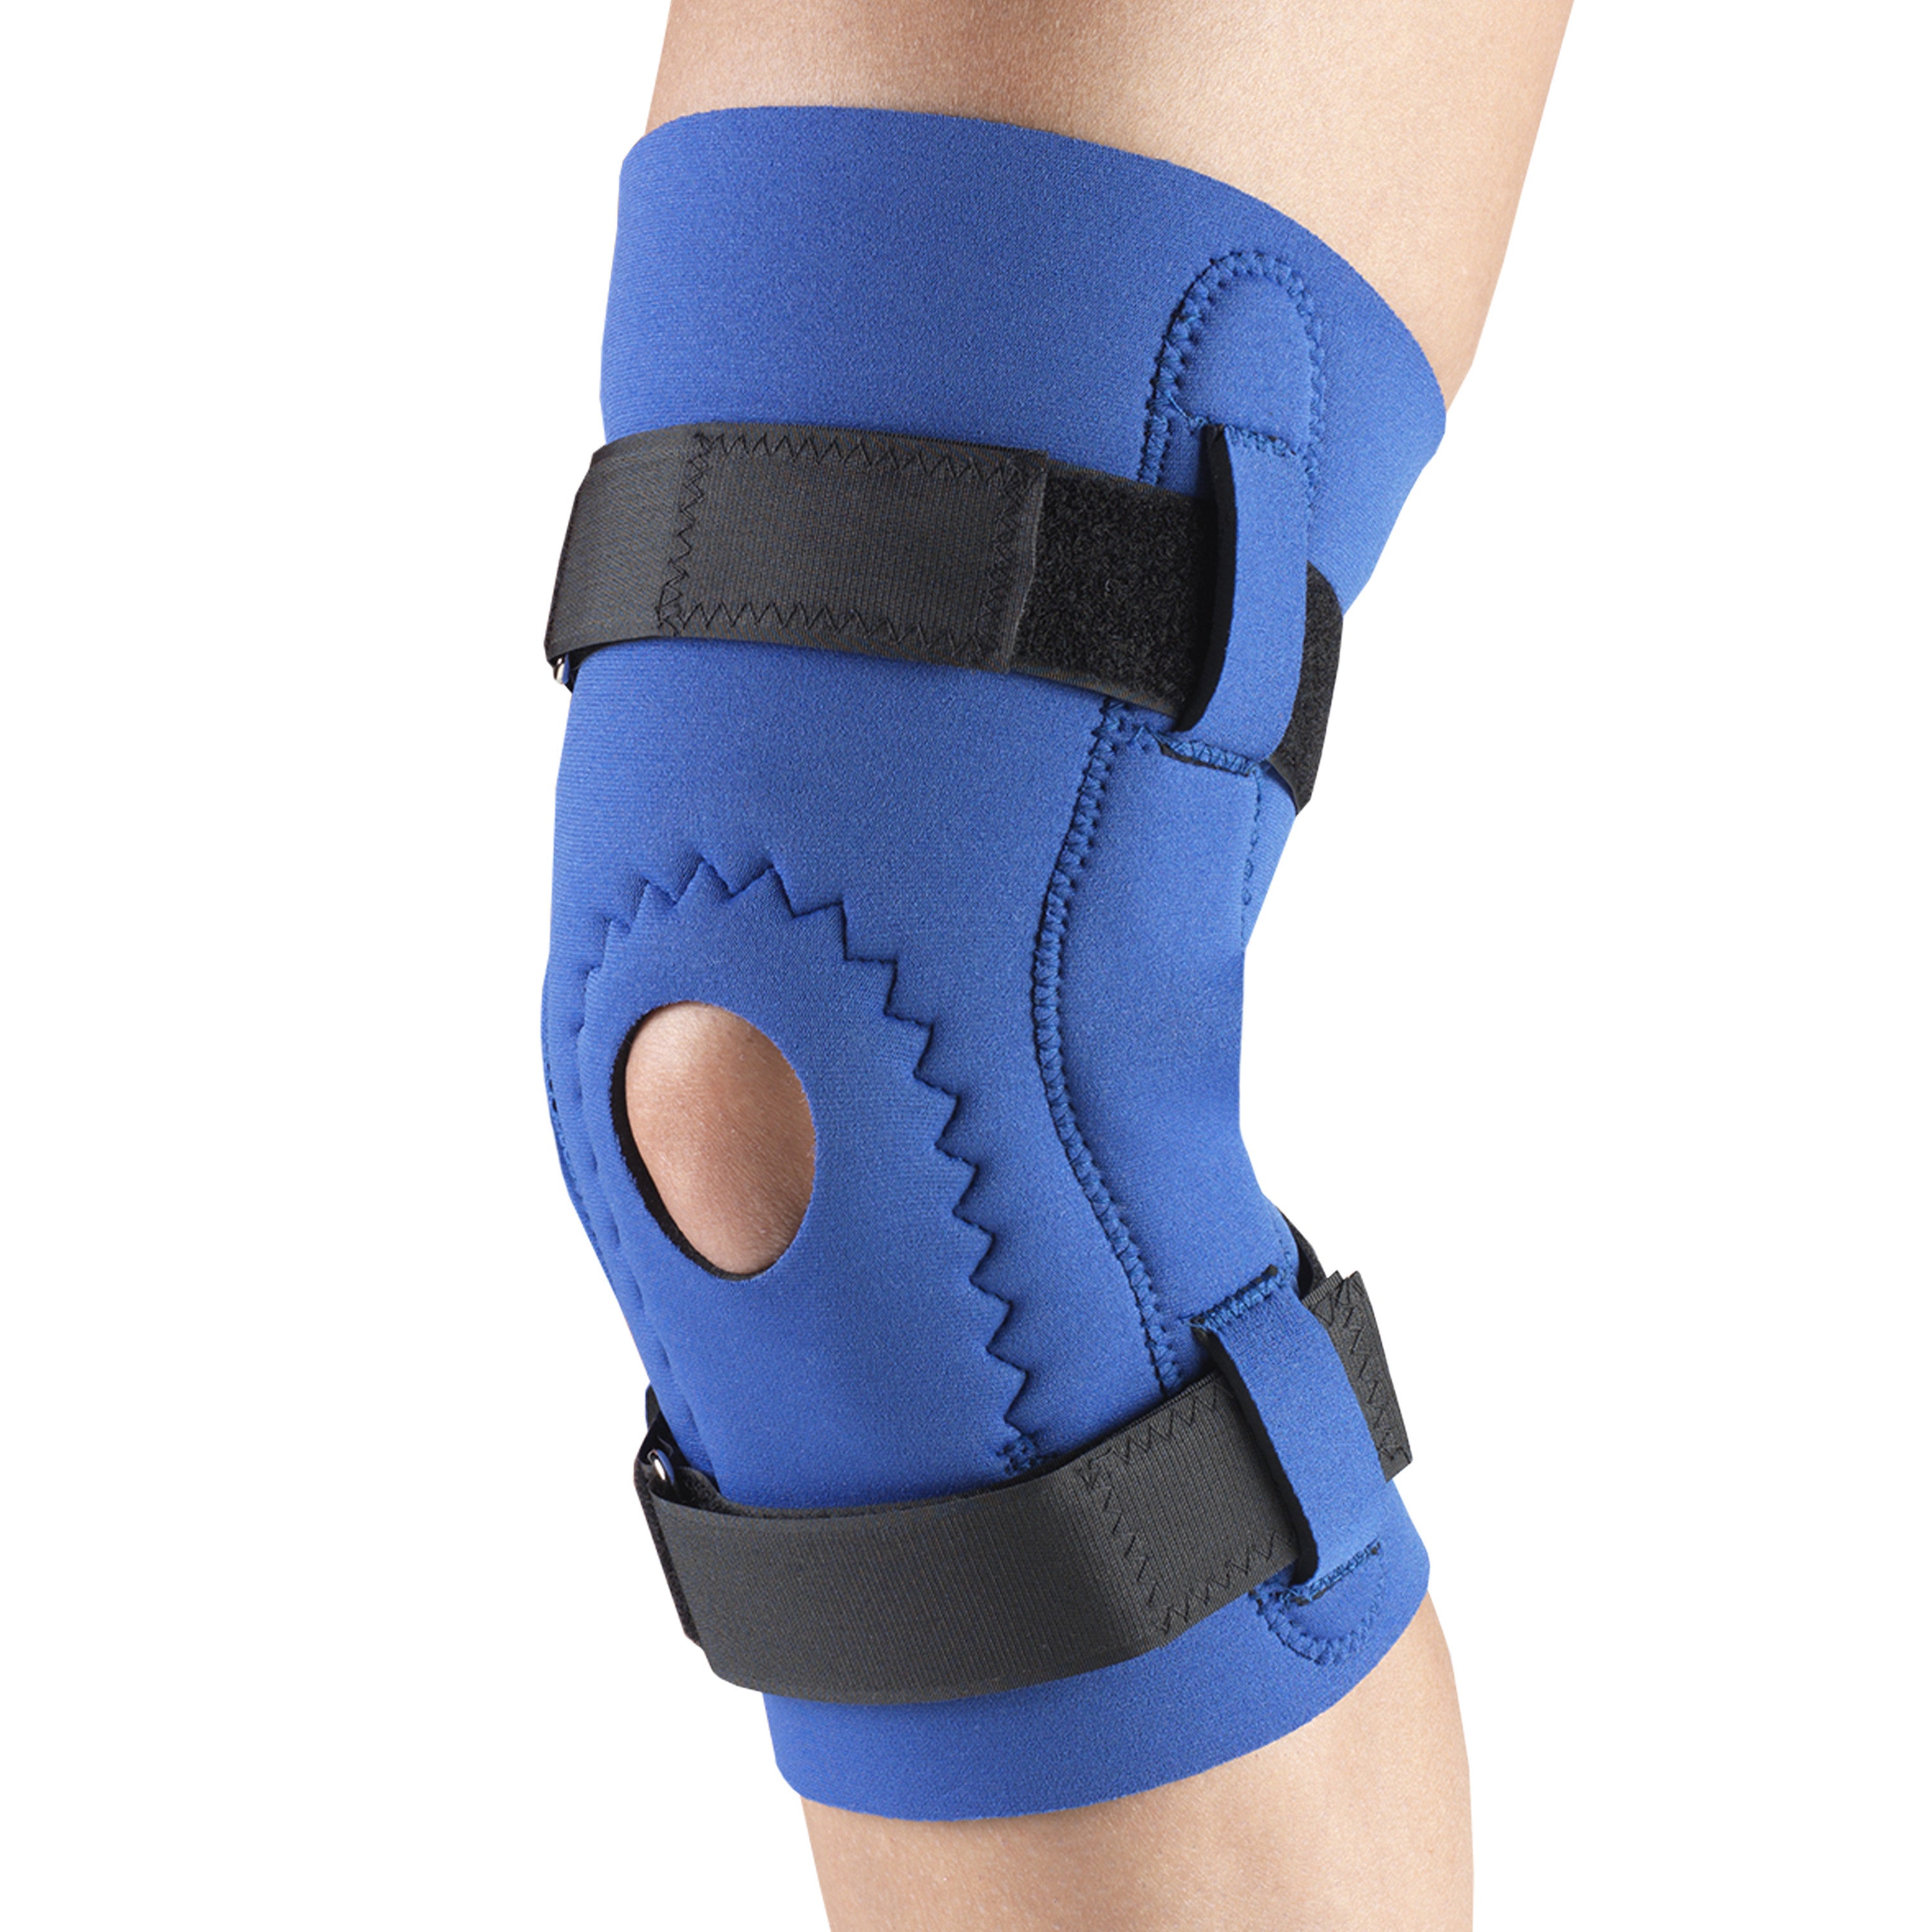 1pc Order A Size Up Swivel Hinge Steel Plate Support Knee Brace  Mountaineering Sports Pressurized With Steel Strip Rehabilitation  Protective Gear Training Knee Support Supplies Knee Protection, Today's  Best Daily Deals